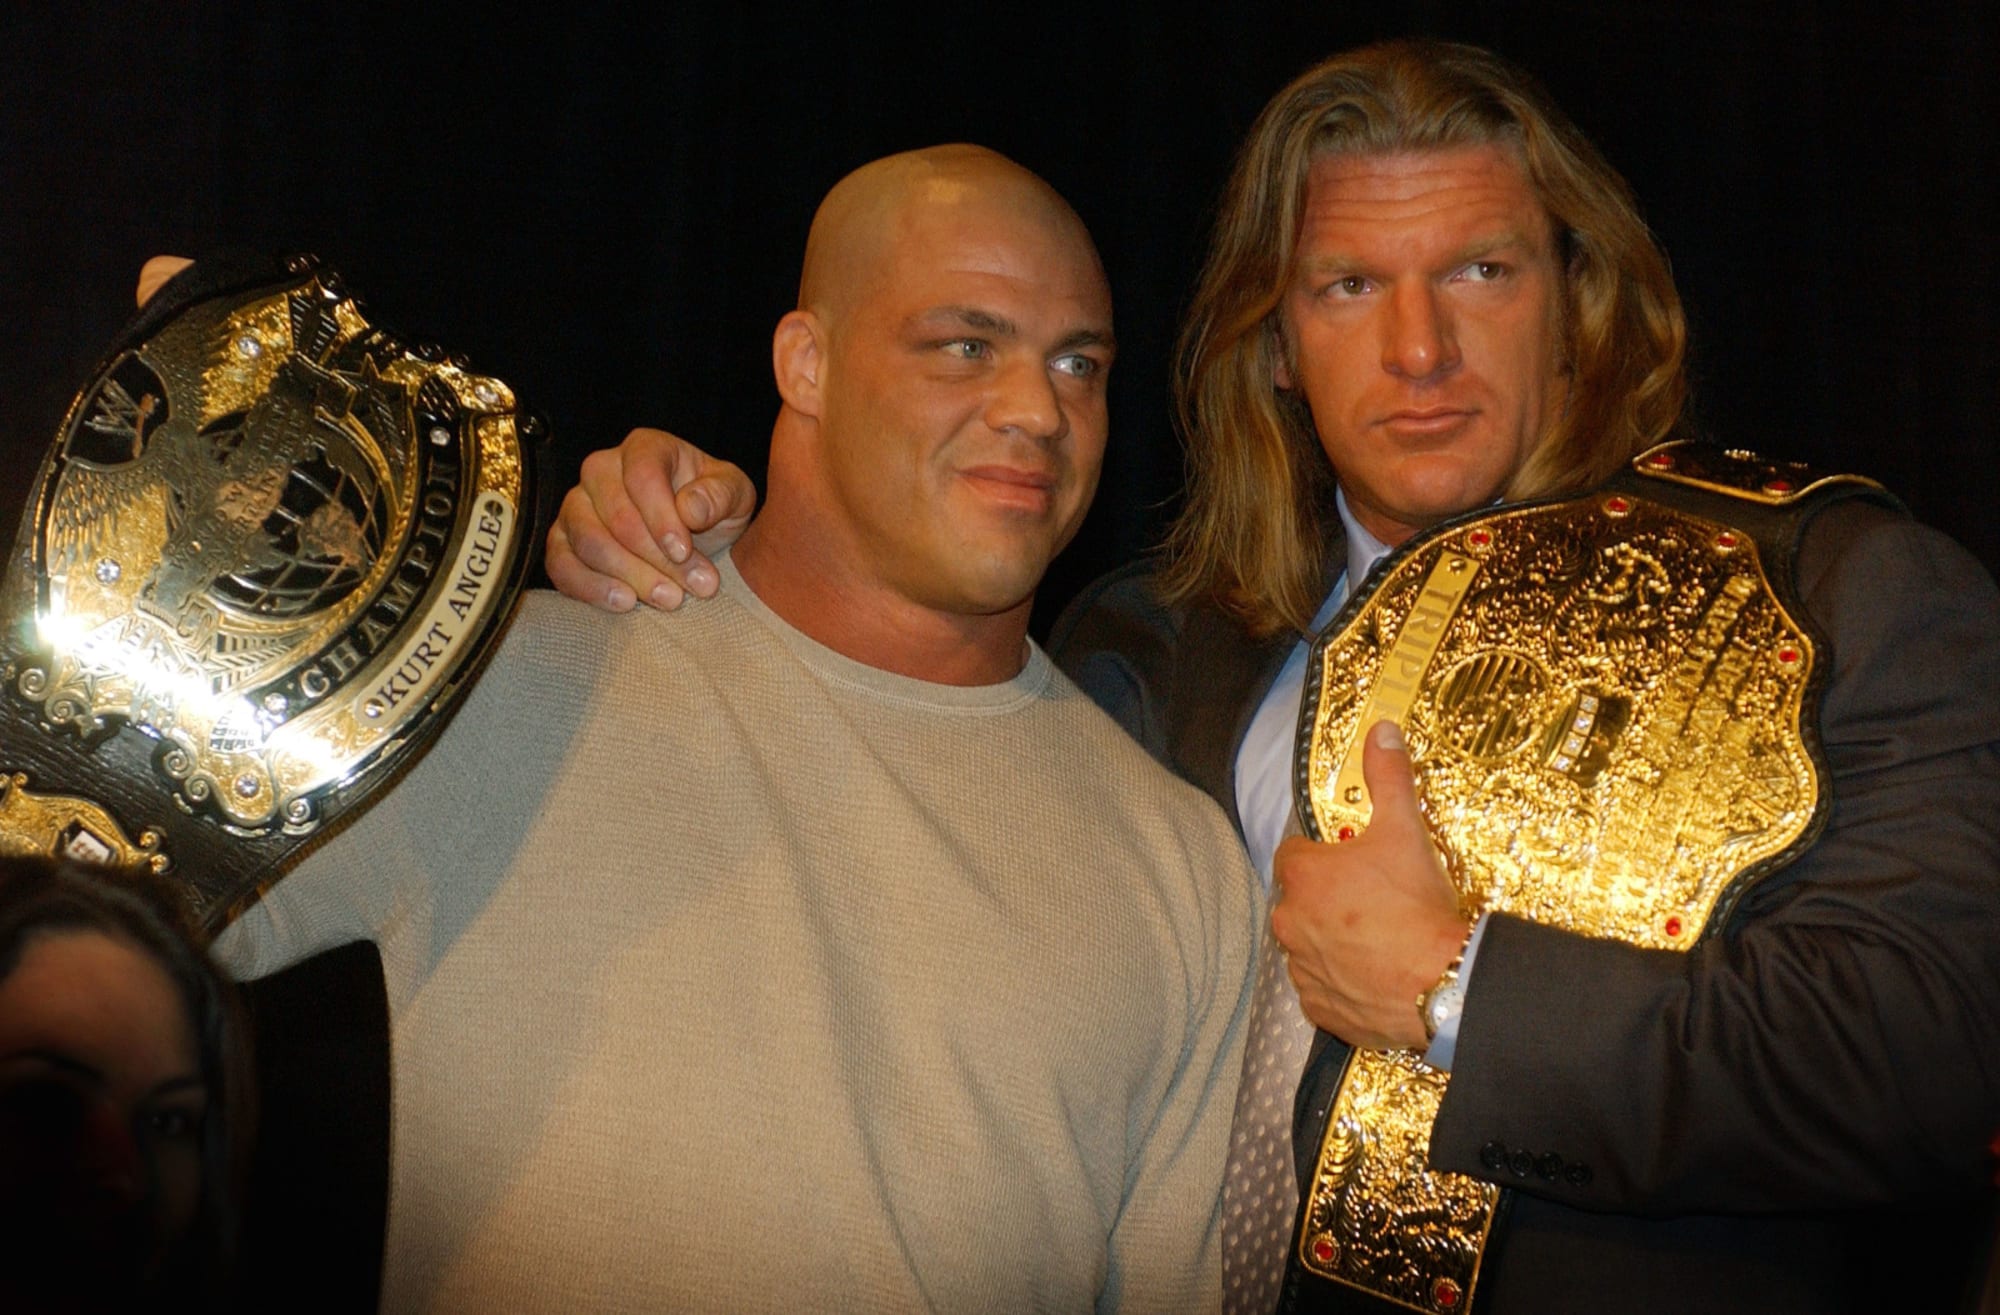 10 Best Tag Team Matches Of All Time